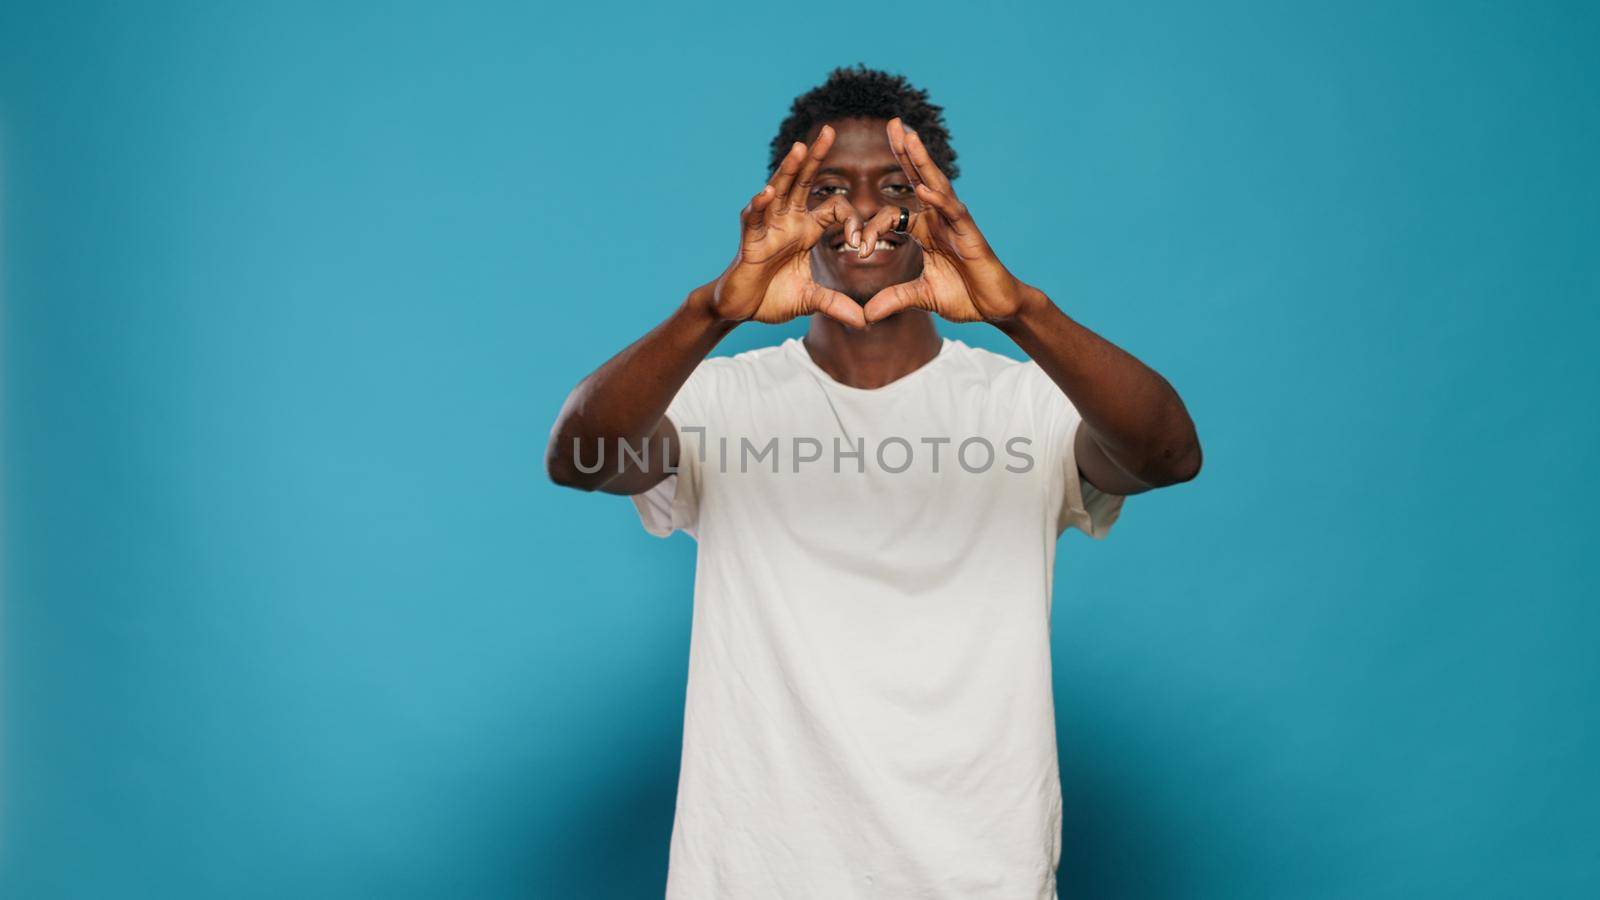 Joyful man doing heart symbol with hands while looking at camera by DCStudio